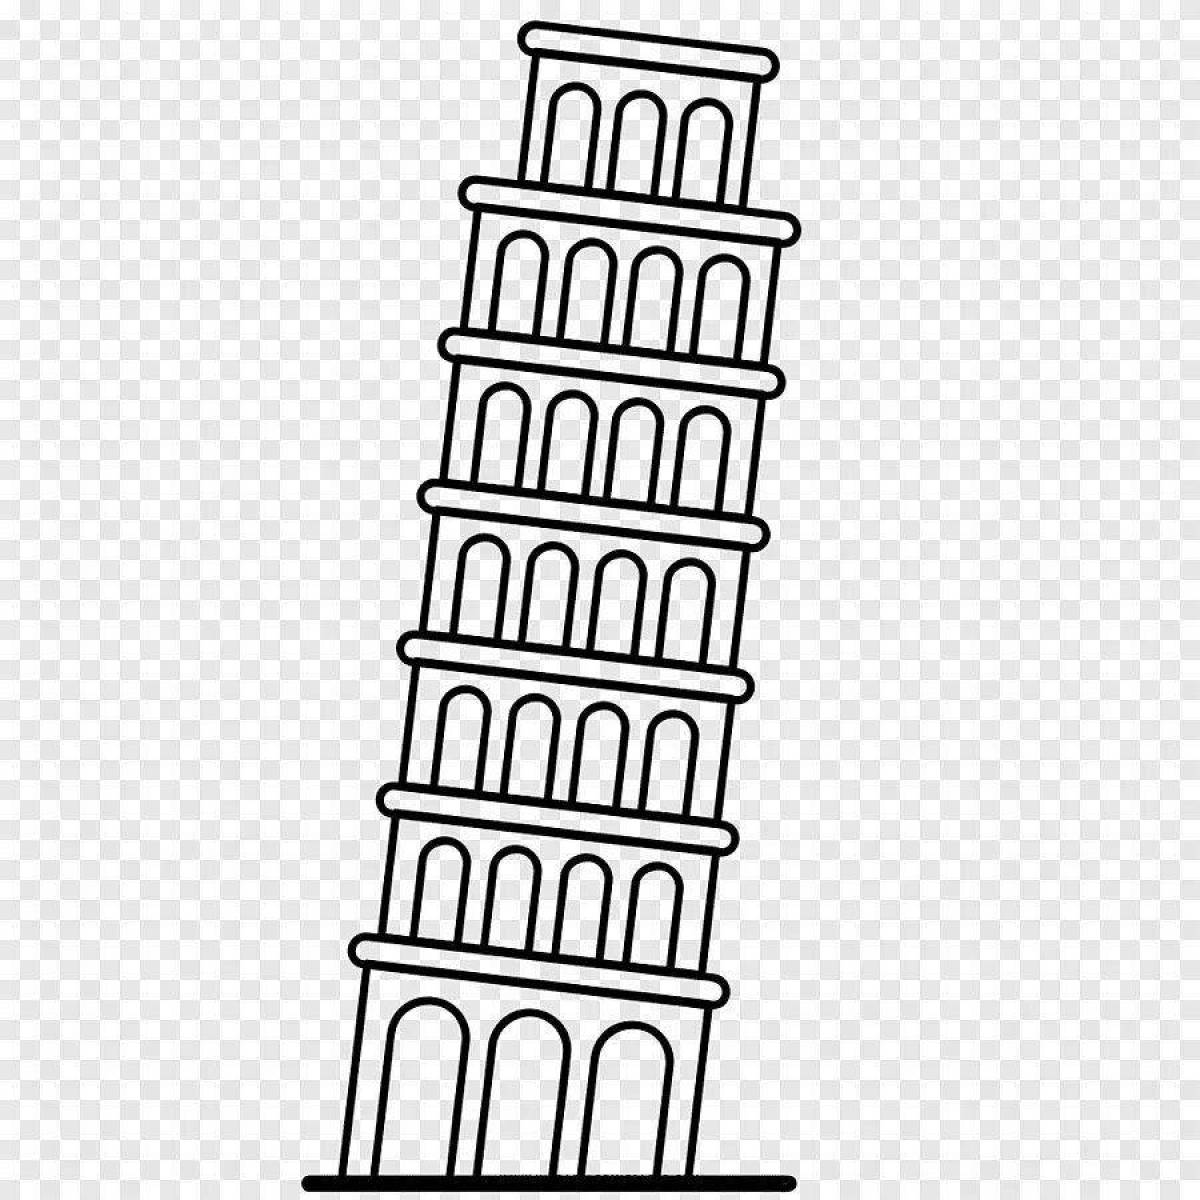 Shiny Leaning Tower of Pisa Coloring